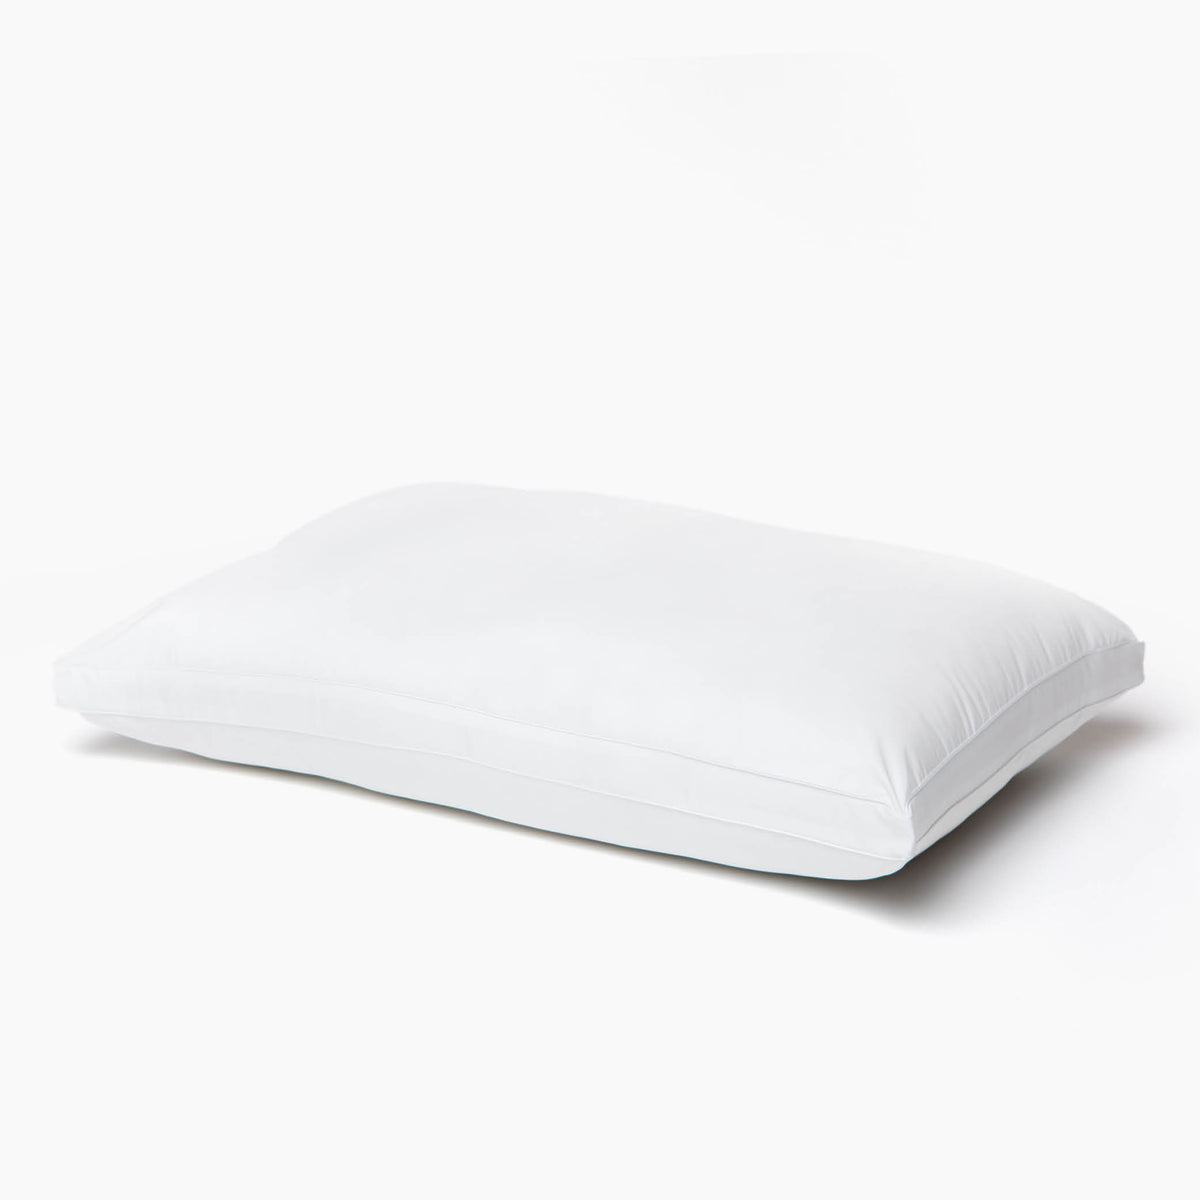 Image of Luxury Resort Hotel Collection Microfiber Pillow (medium/high loft) on a white background 